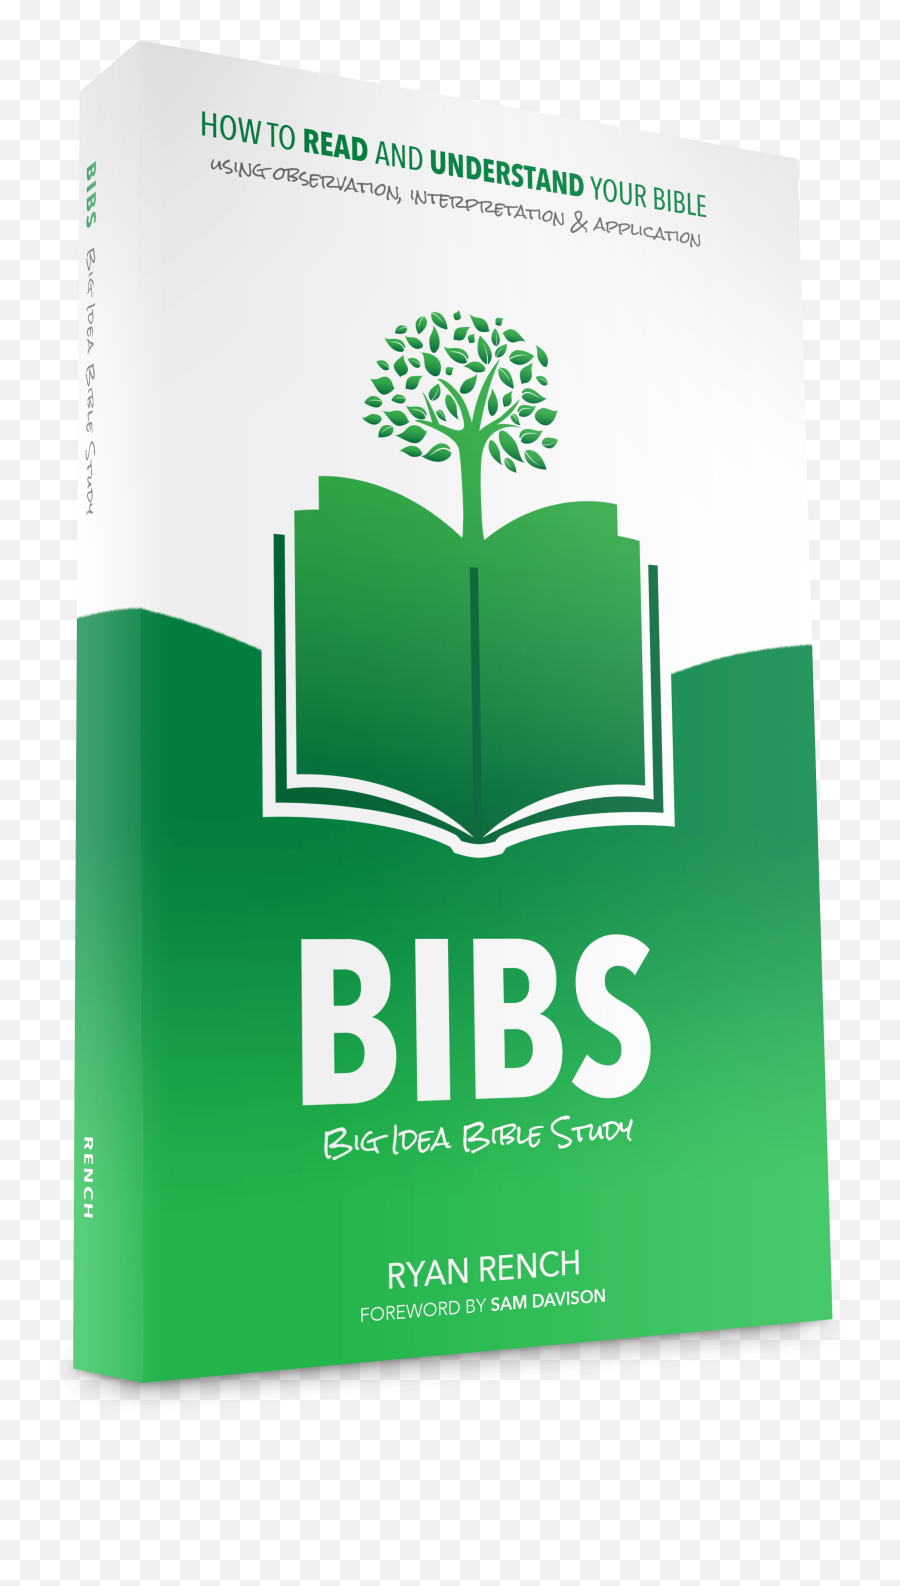 Download Bibs Bible Study - Full Size Png Image Pngkit Bibs Devotional Bible Study Guide,Bible Study Png